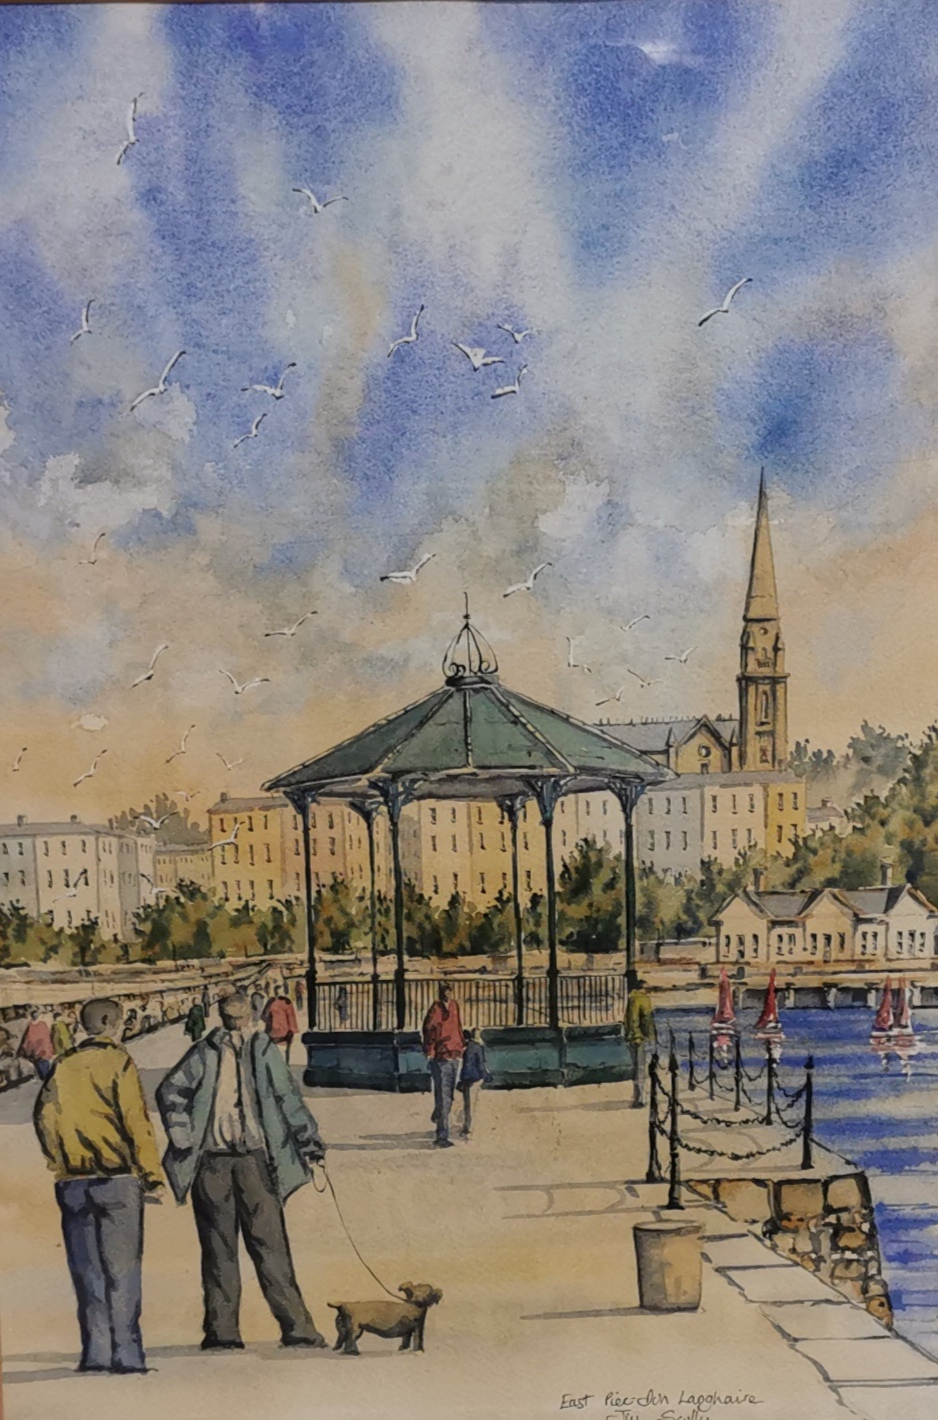 JIM SCULLY “East Pier Dun Laoghaire”, original Watercolour/Indian Ink, pedestrians with gazebo in